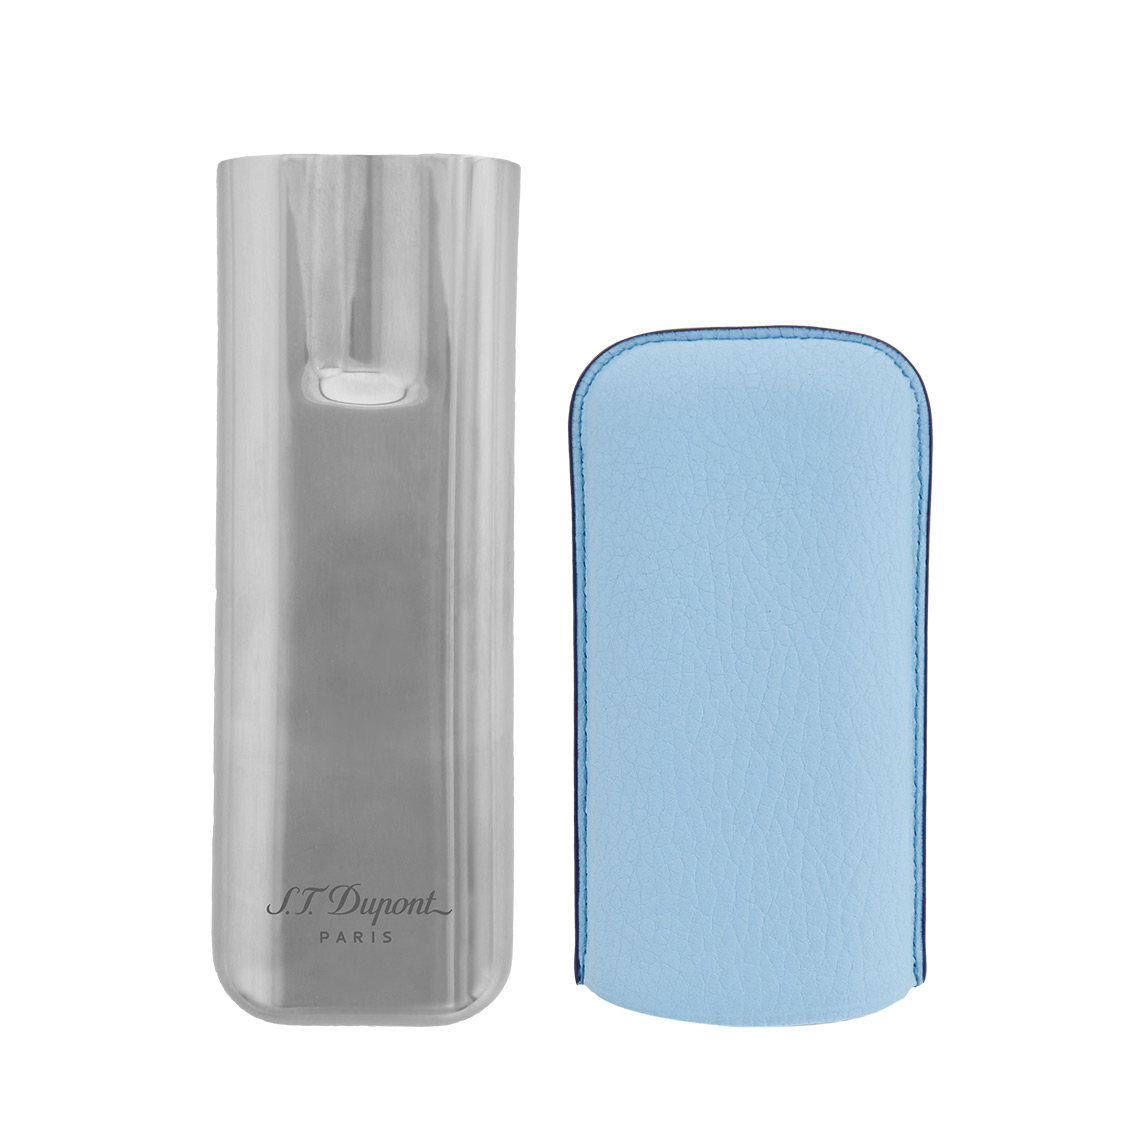 TURQUOISE GRAINED AND CHROME DOUBLE CIGAR CASE